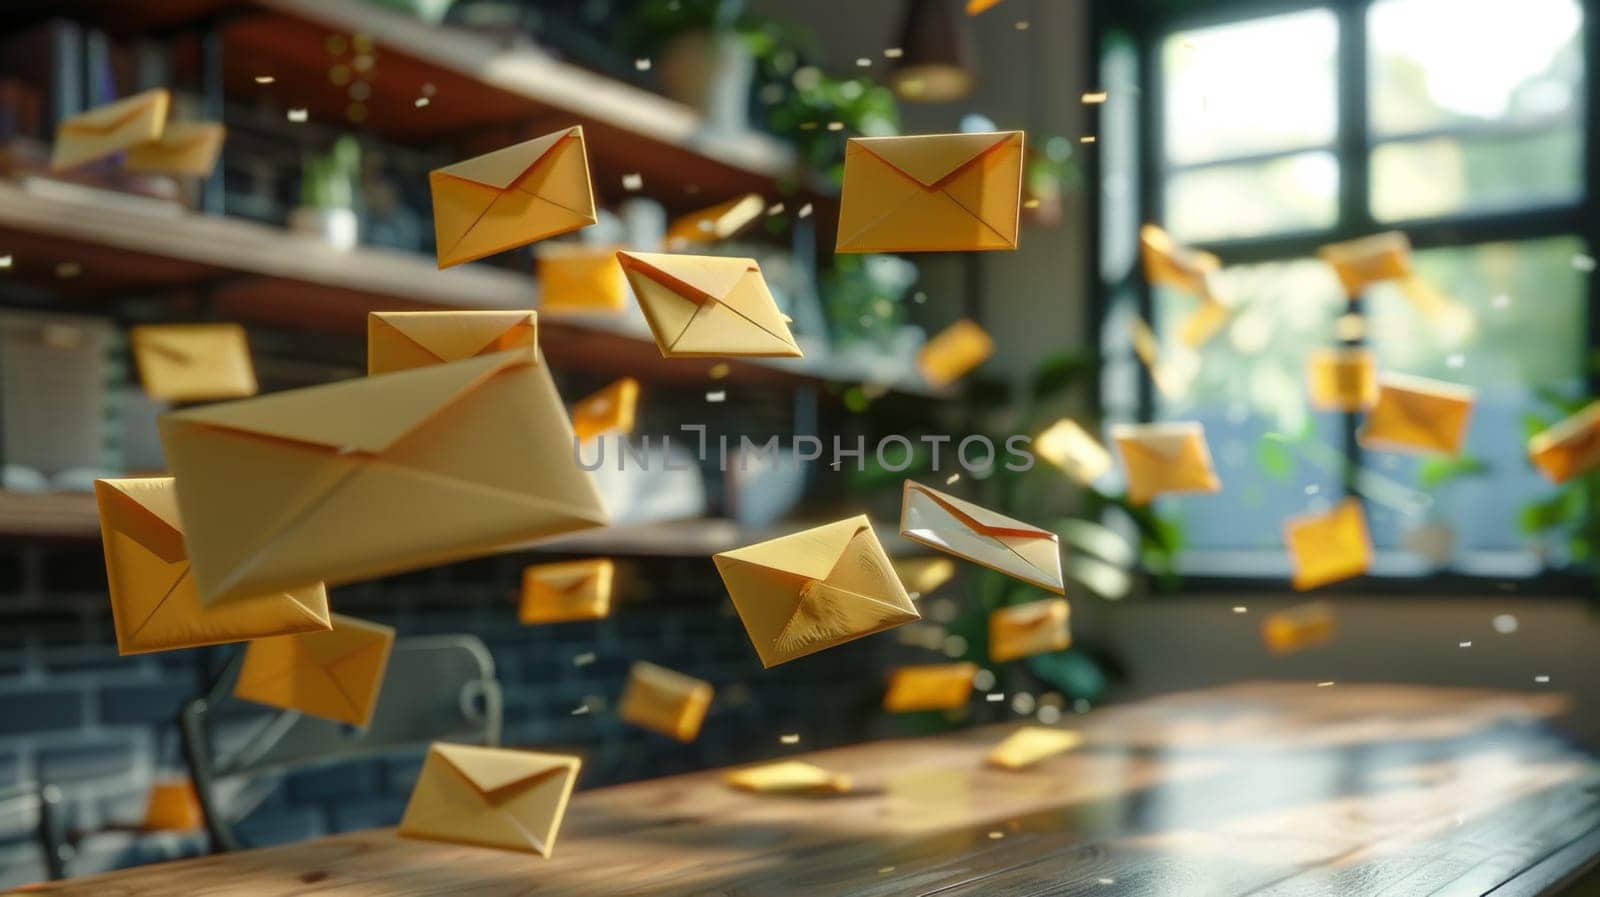 A bunch of yellow envelopes are flying out from a table